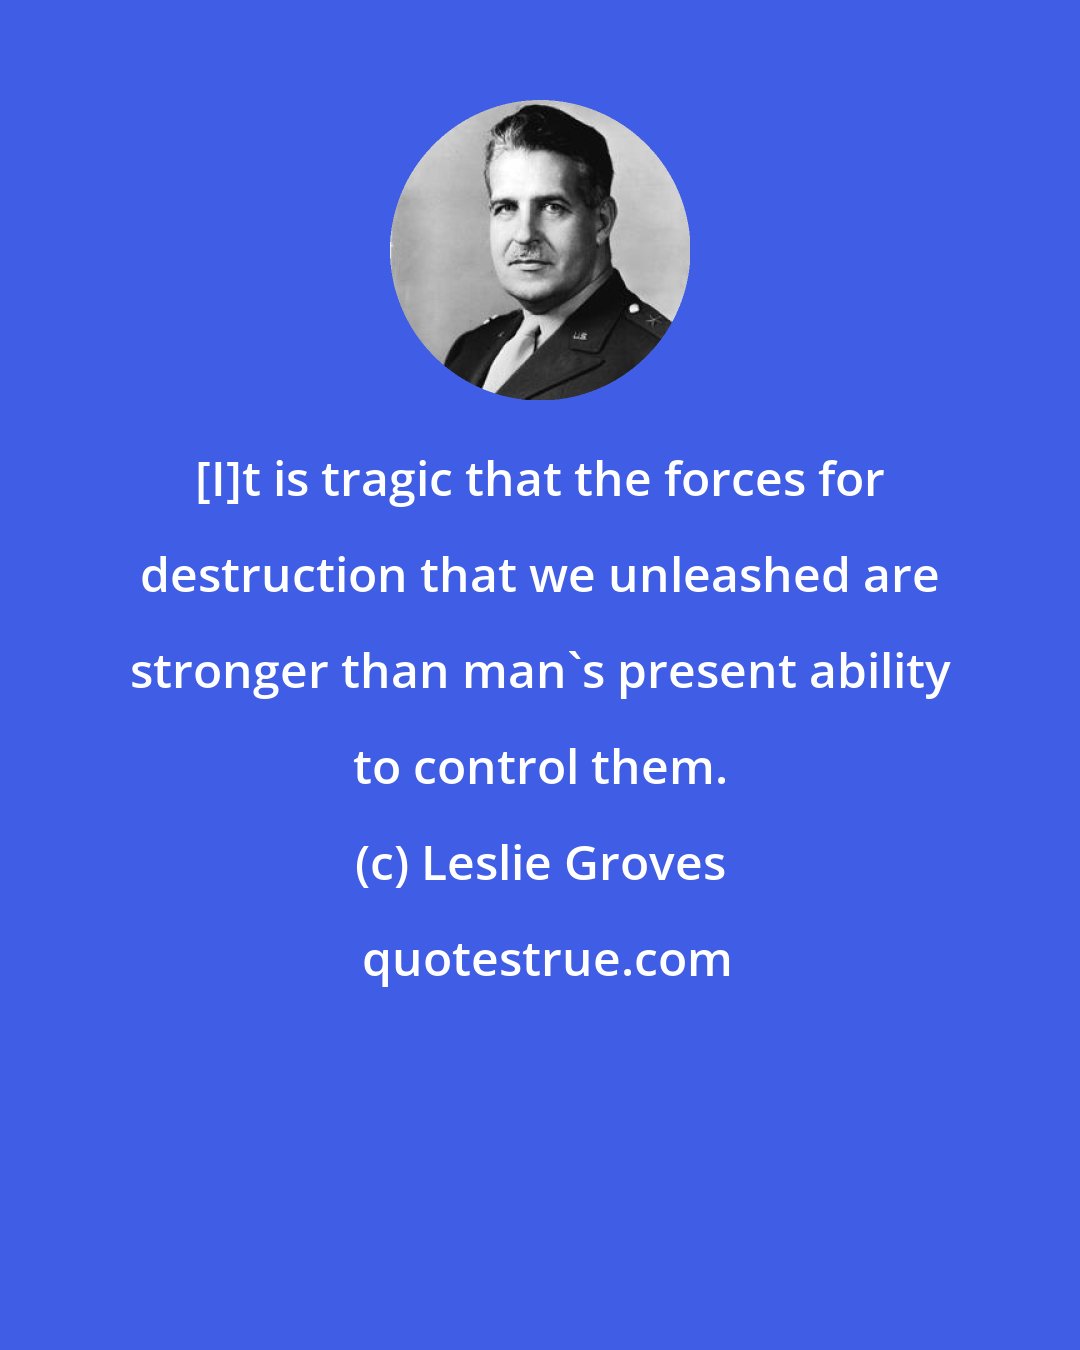 Leslie Groves: [I]t is tragic that the forces for destruction that we unleashed are stronger than man's present ability to control them.